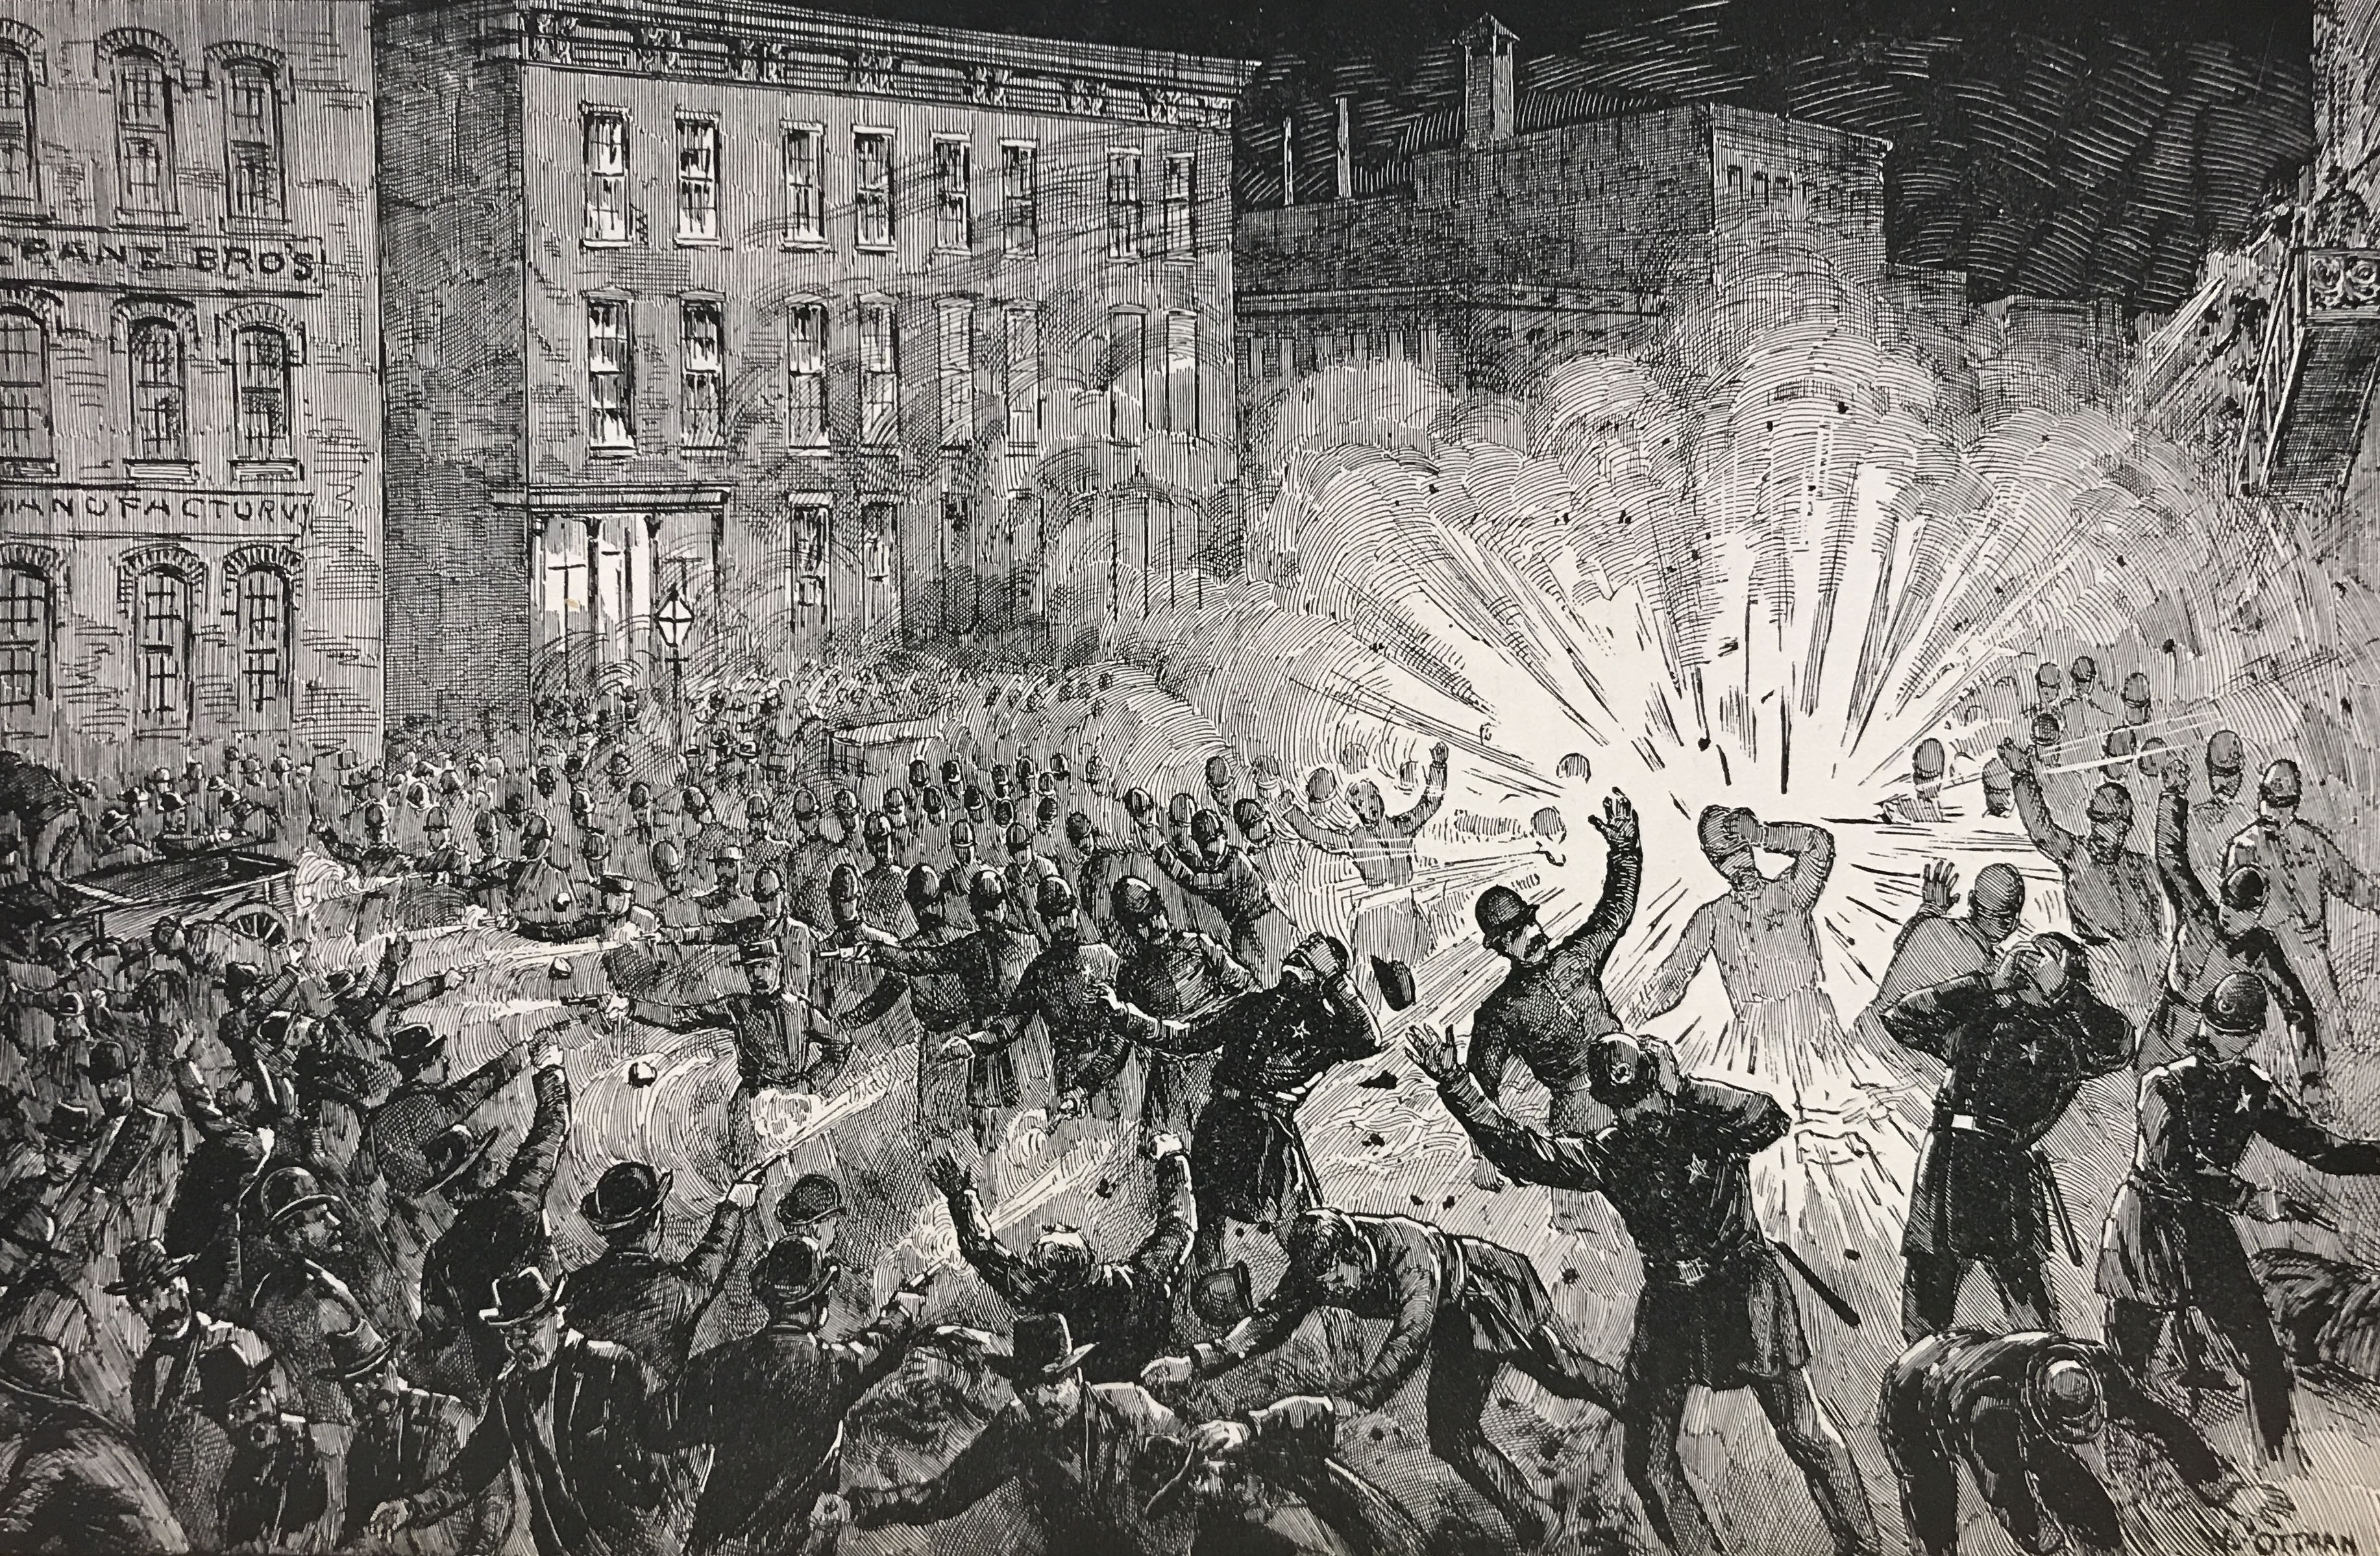 Illustration of the scene in Haymarket Square as the bomb exploded.